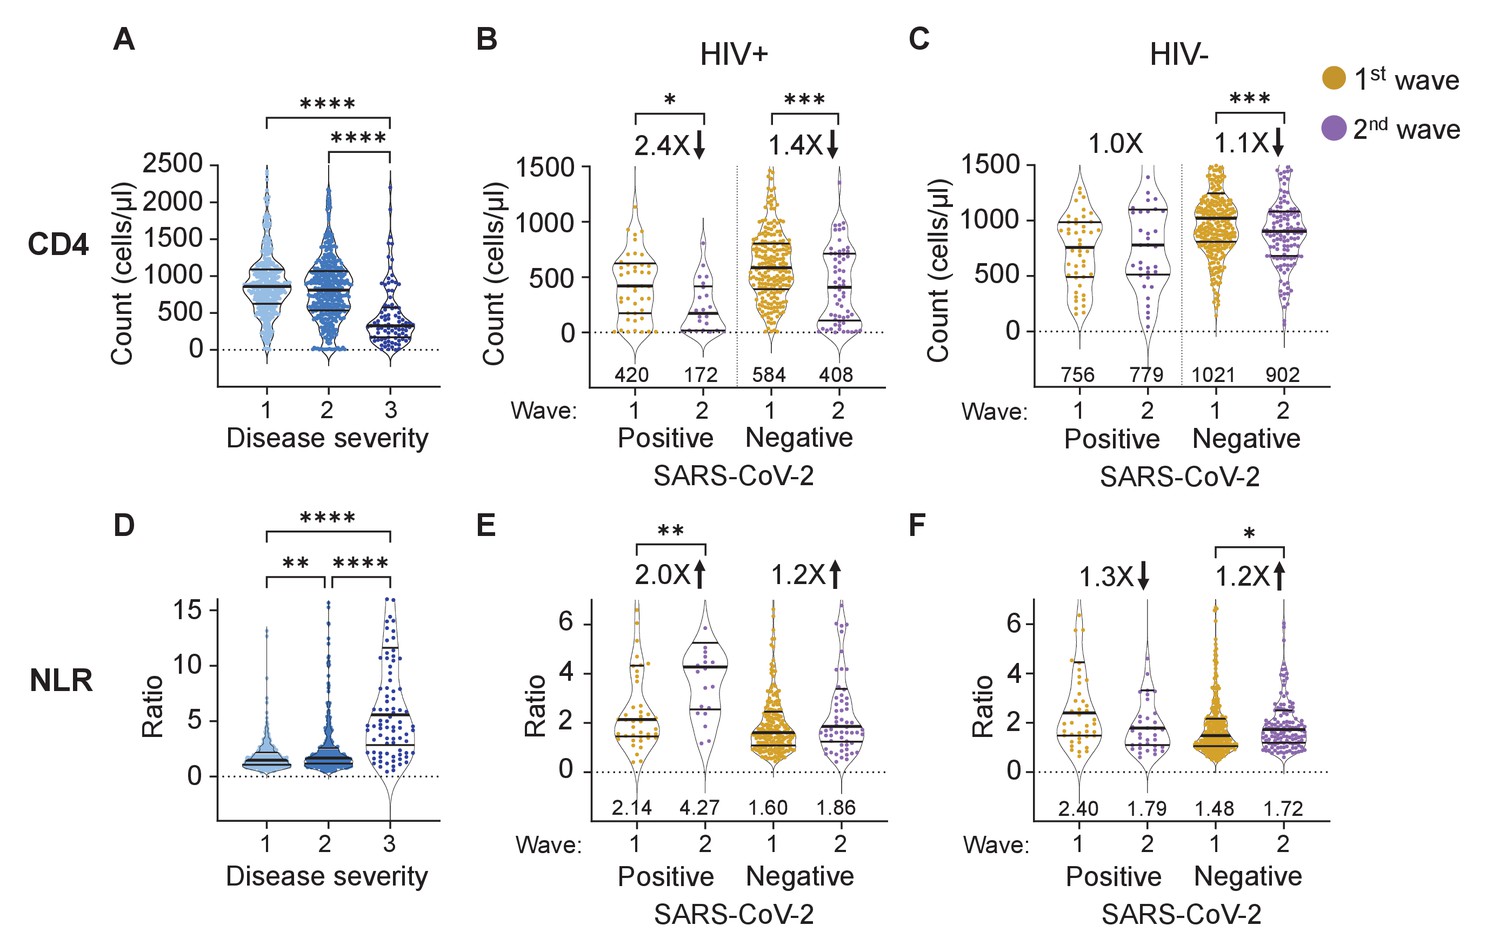 HIV status alters disease severity and immune cell responses in Beta  variant SARS-CoV-2 infection wave